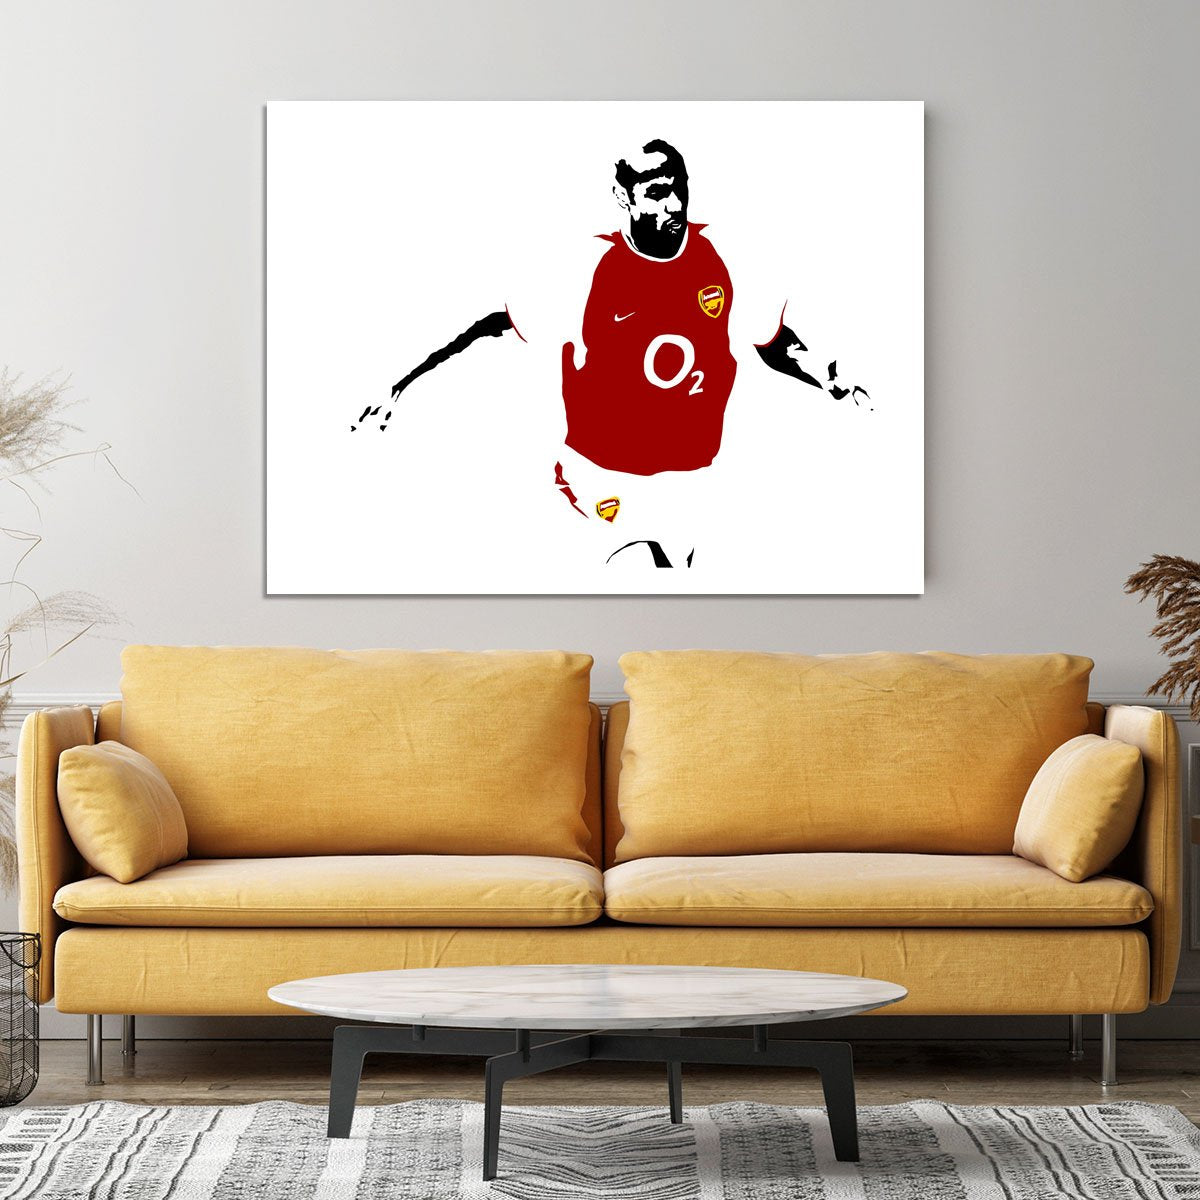 Thierry Henry Pop Art Canvas Print or Poster